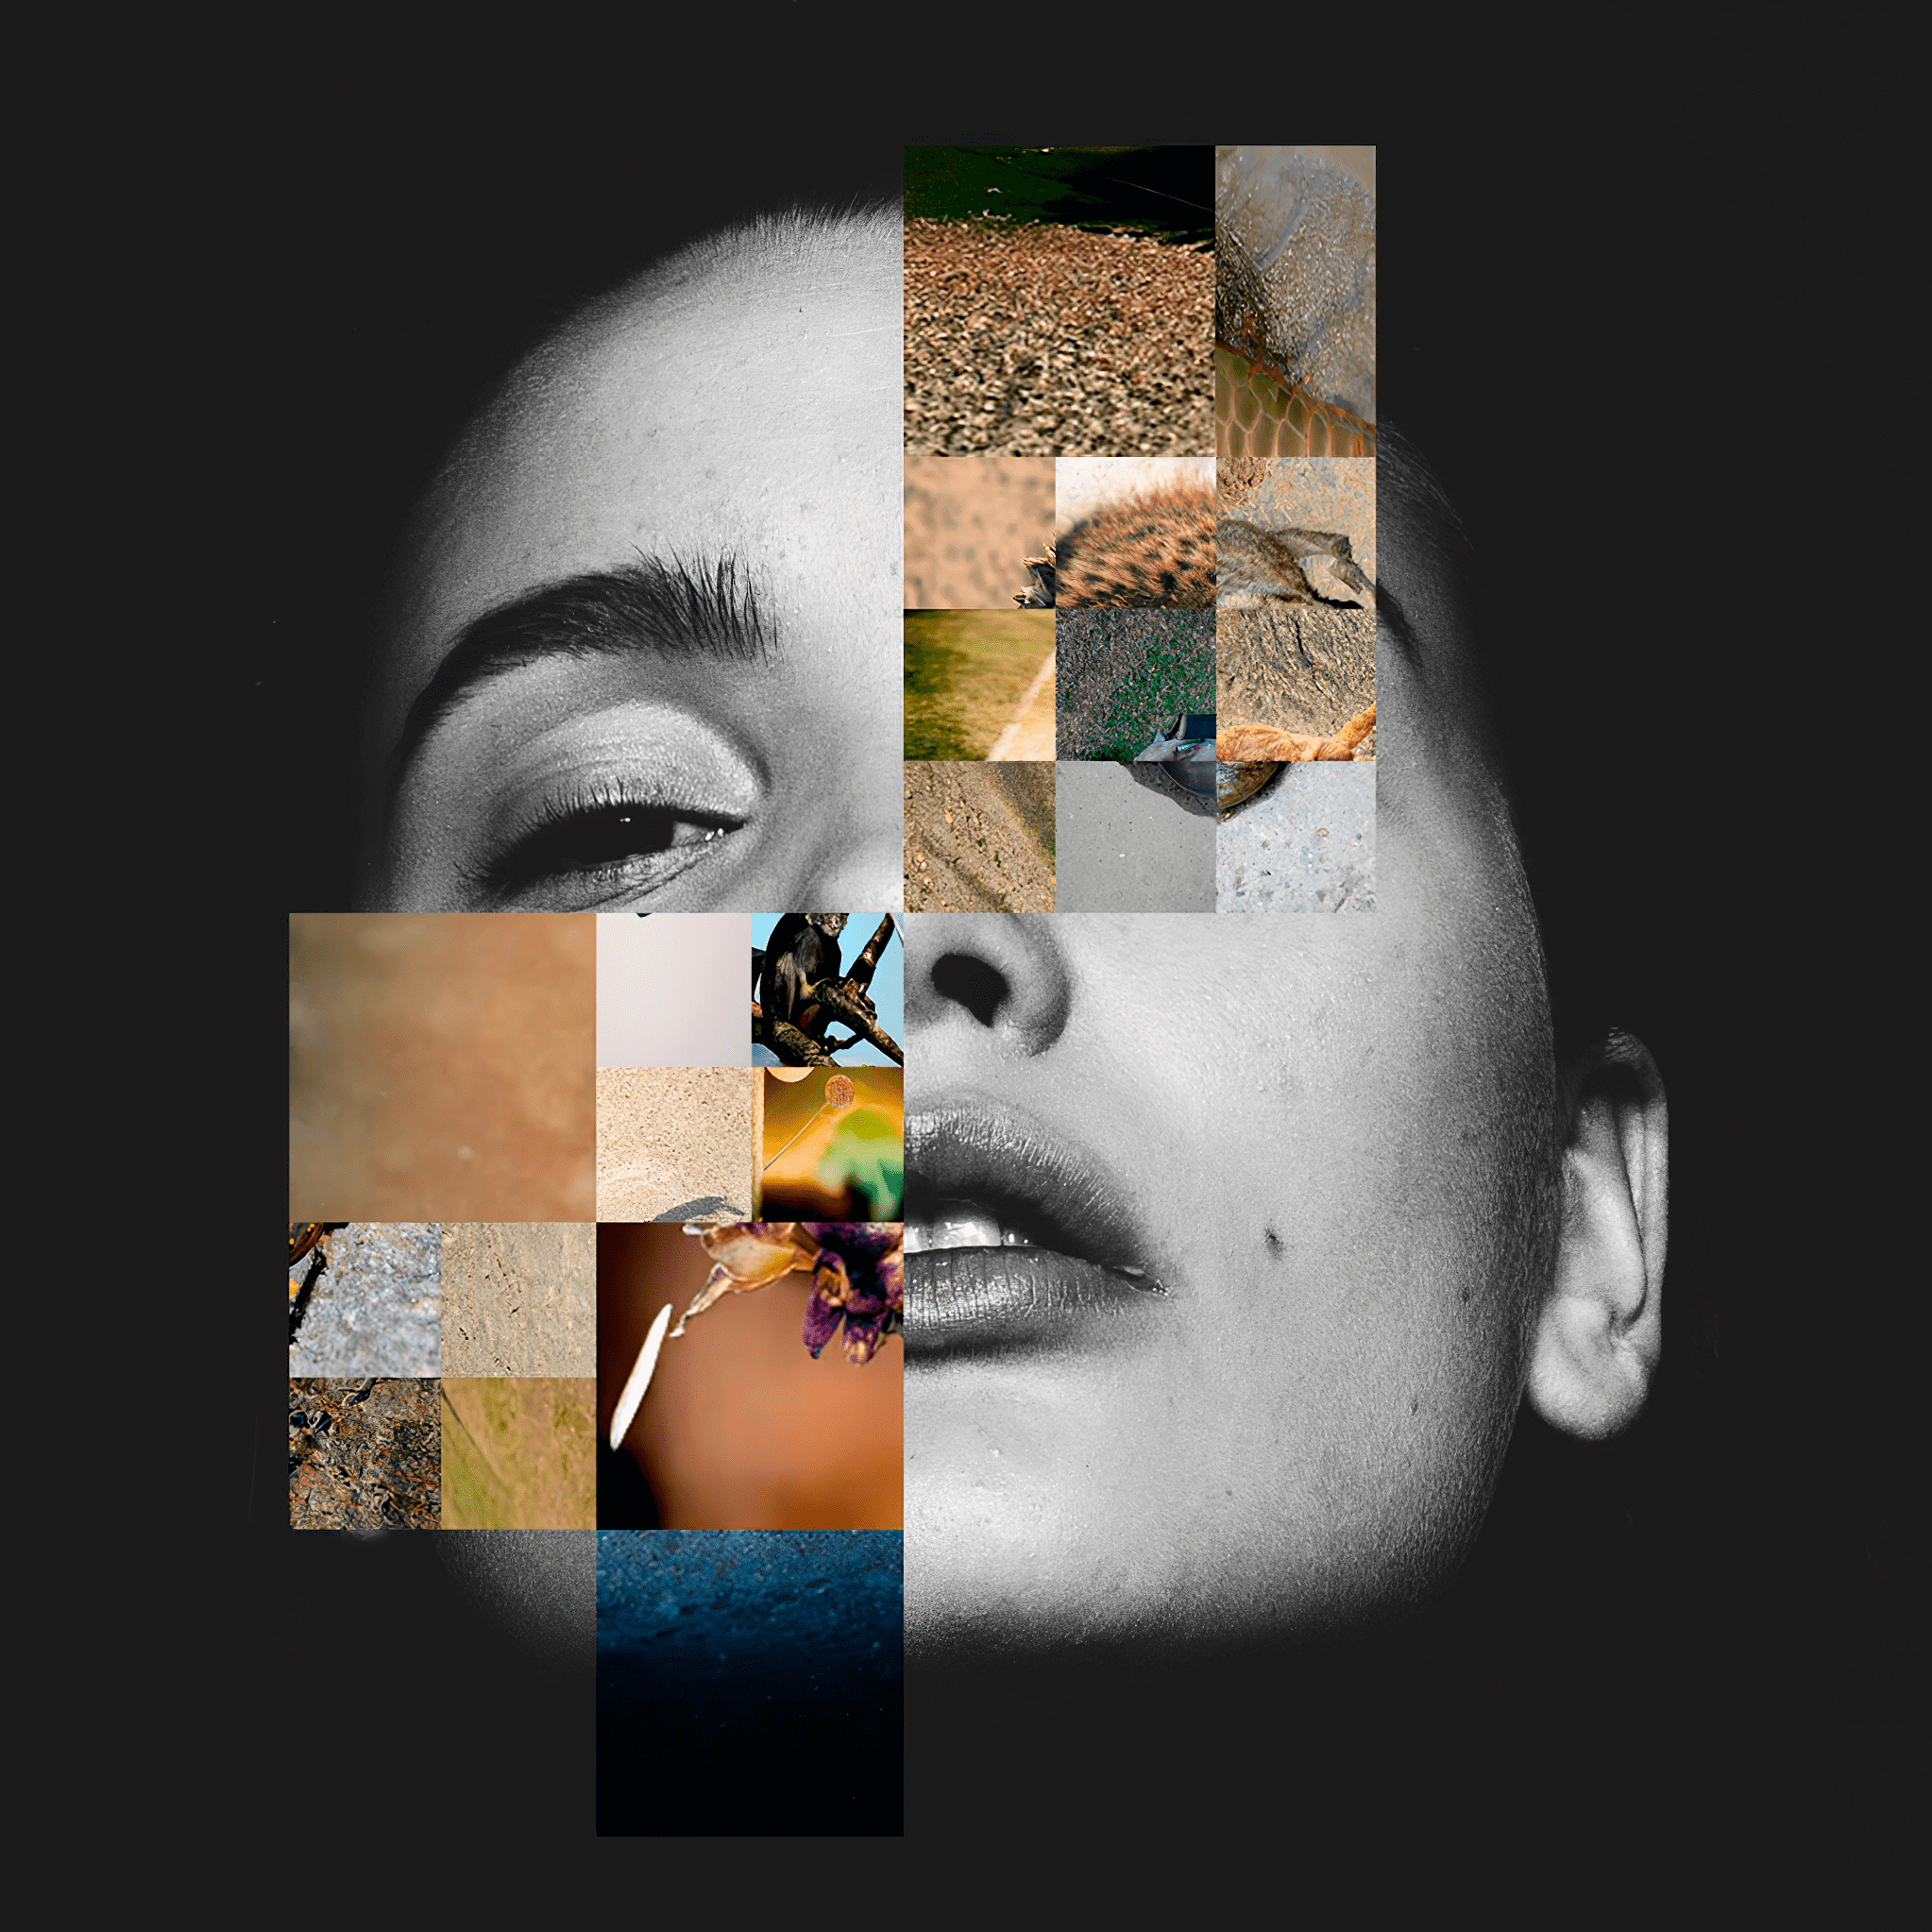 Mosaic grid over face